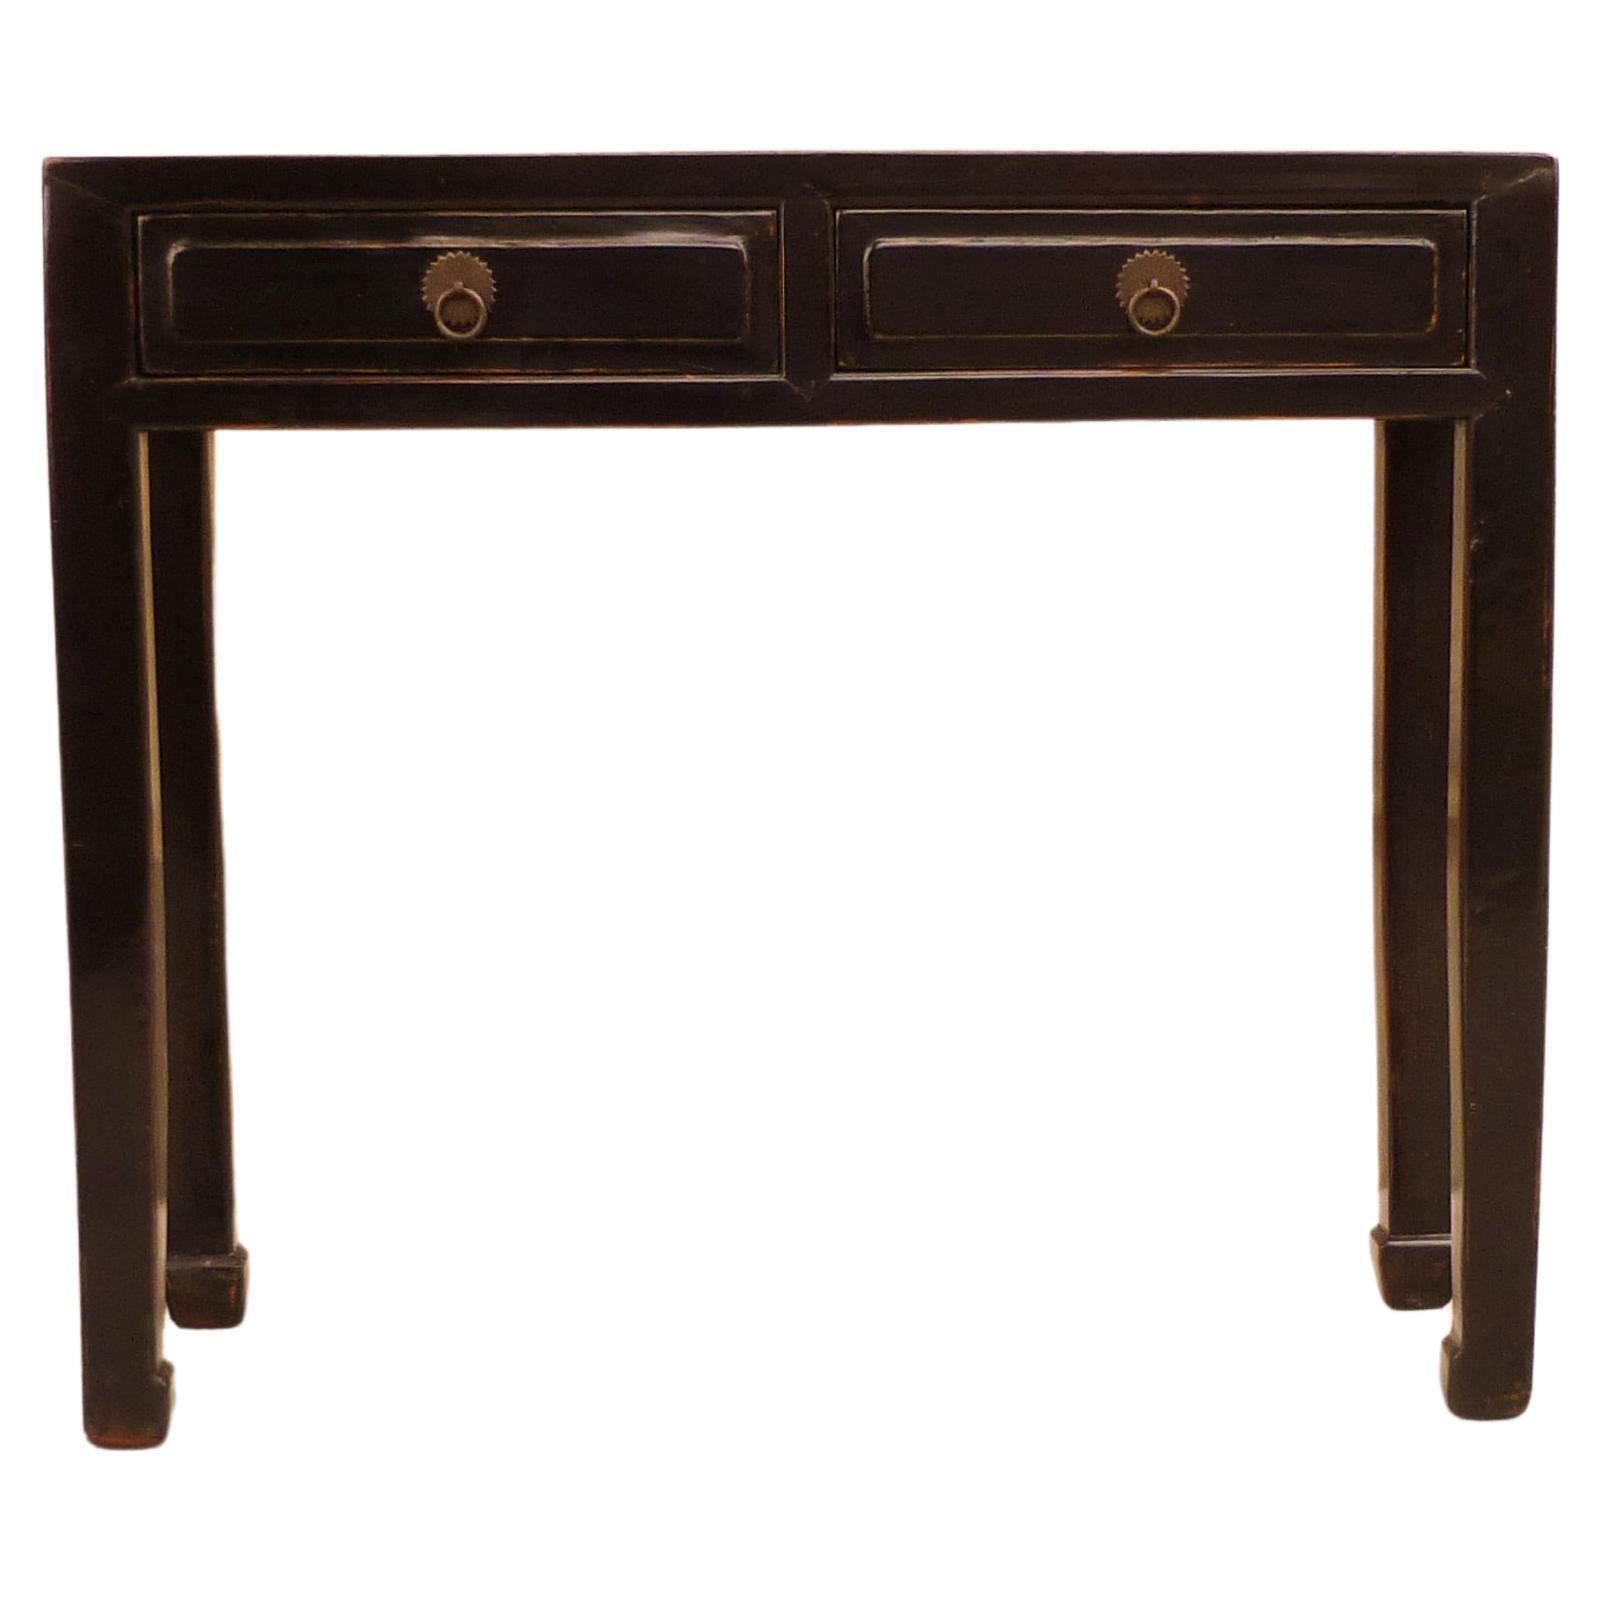 Black Lacquer Console Table with Drawers